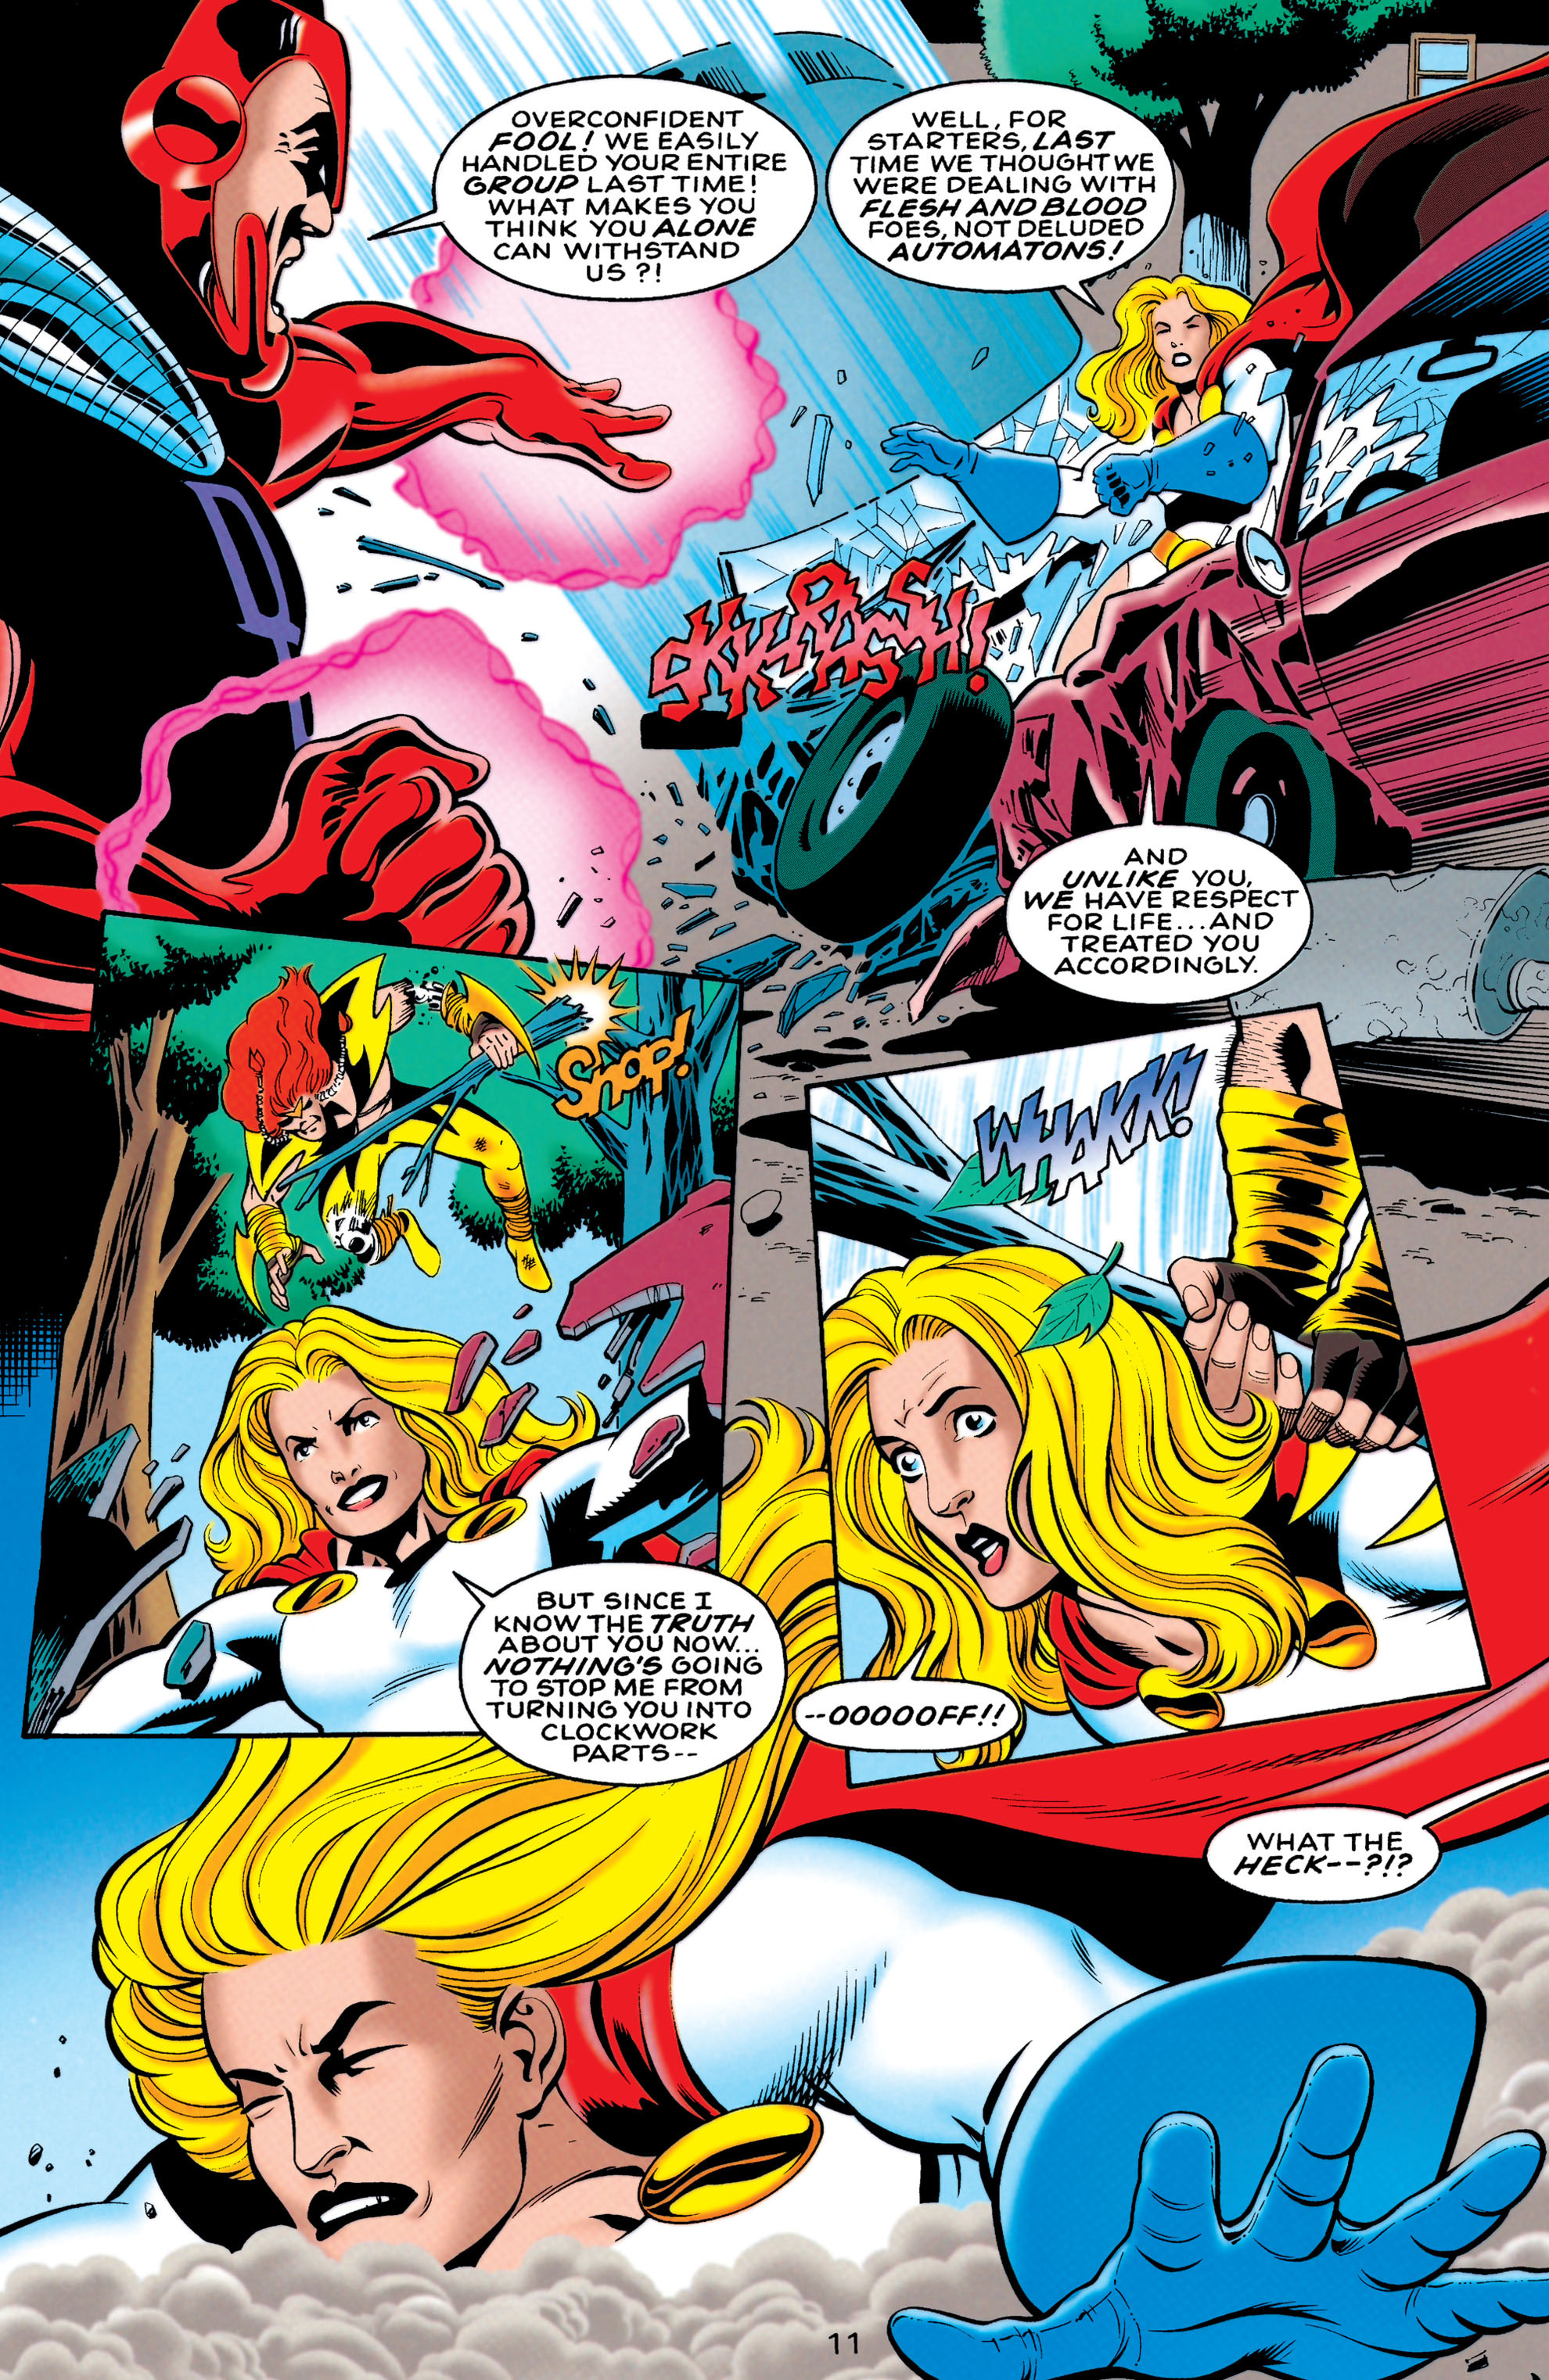 Supergirl (1996) 16 Page 11